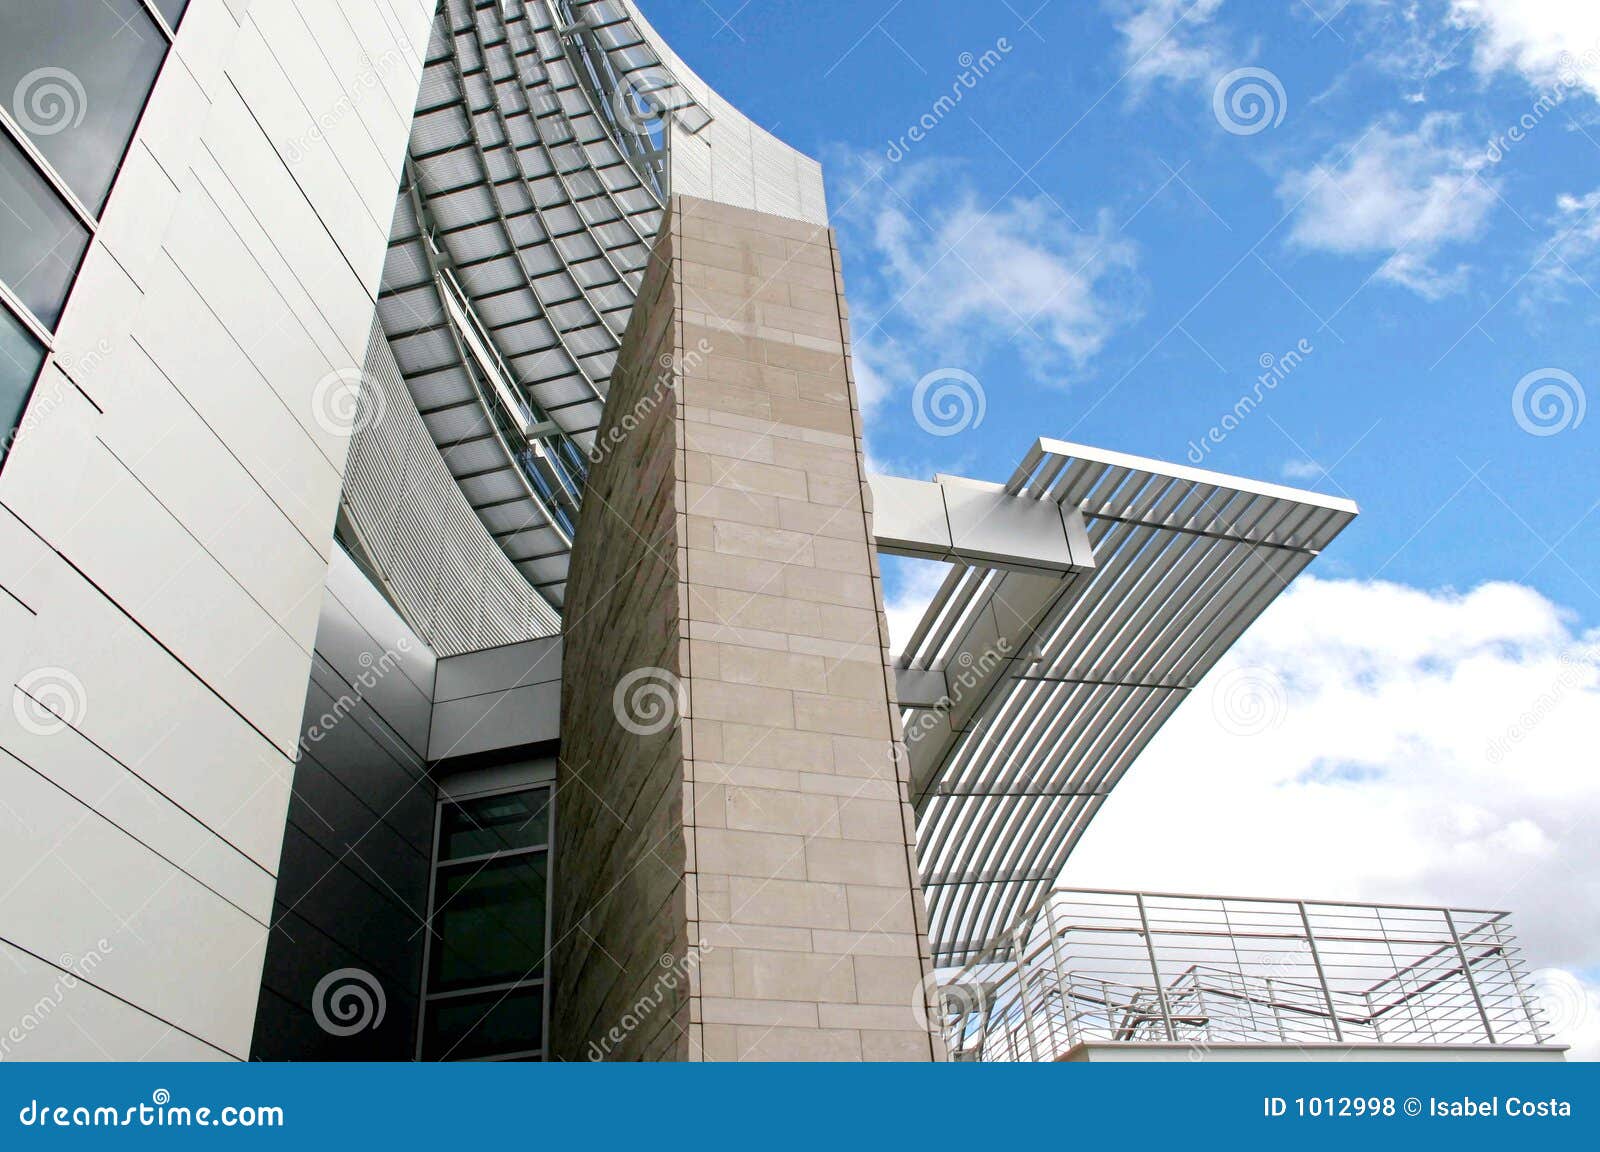 Royalty Free Stock Photos: Modern building view from below